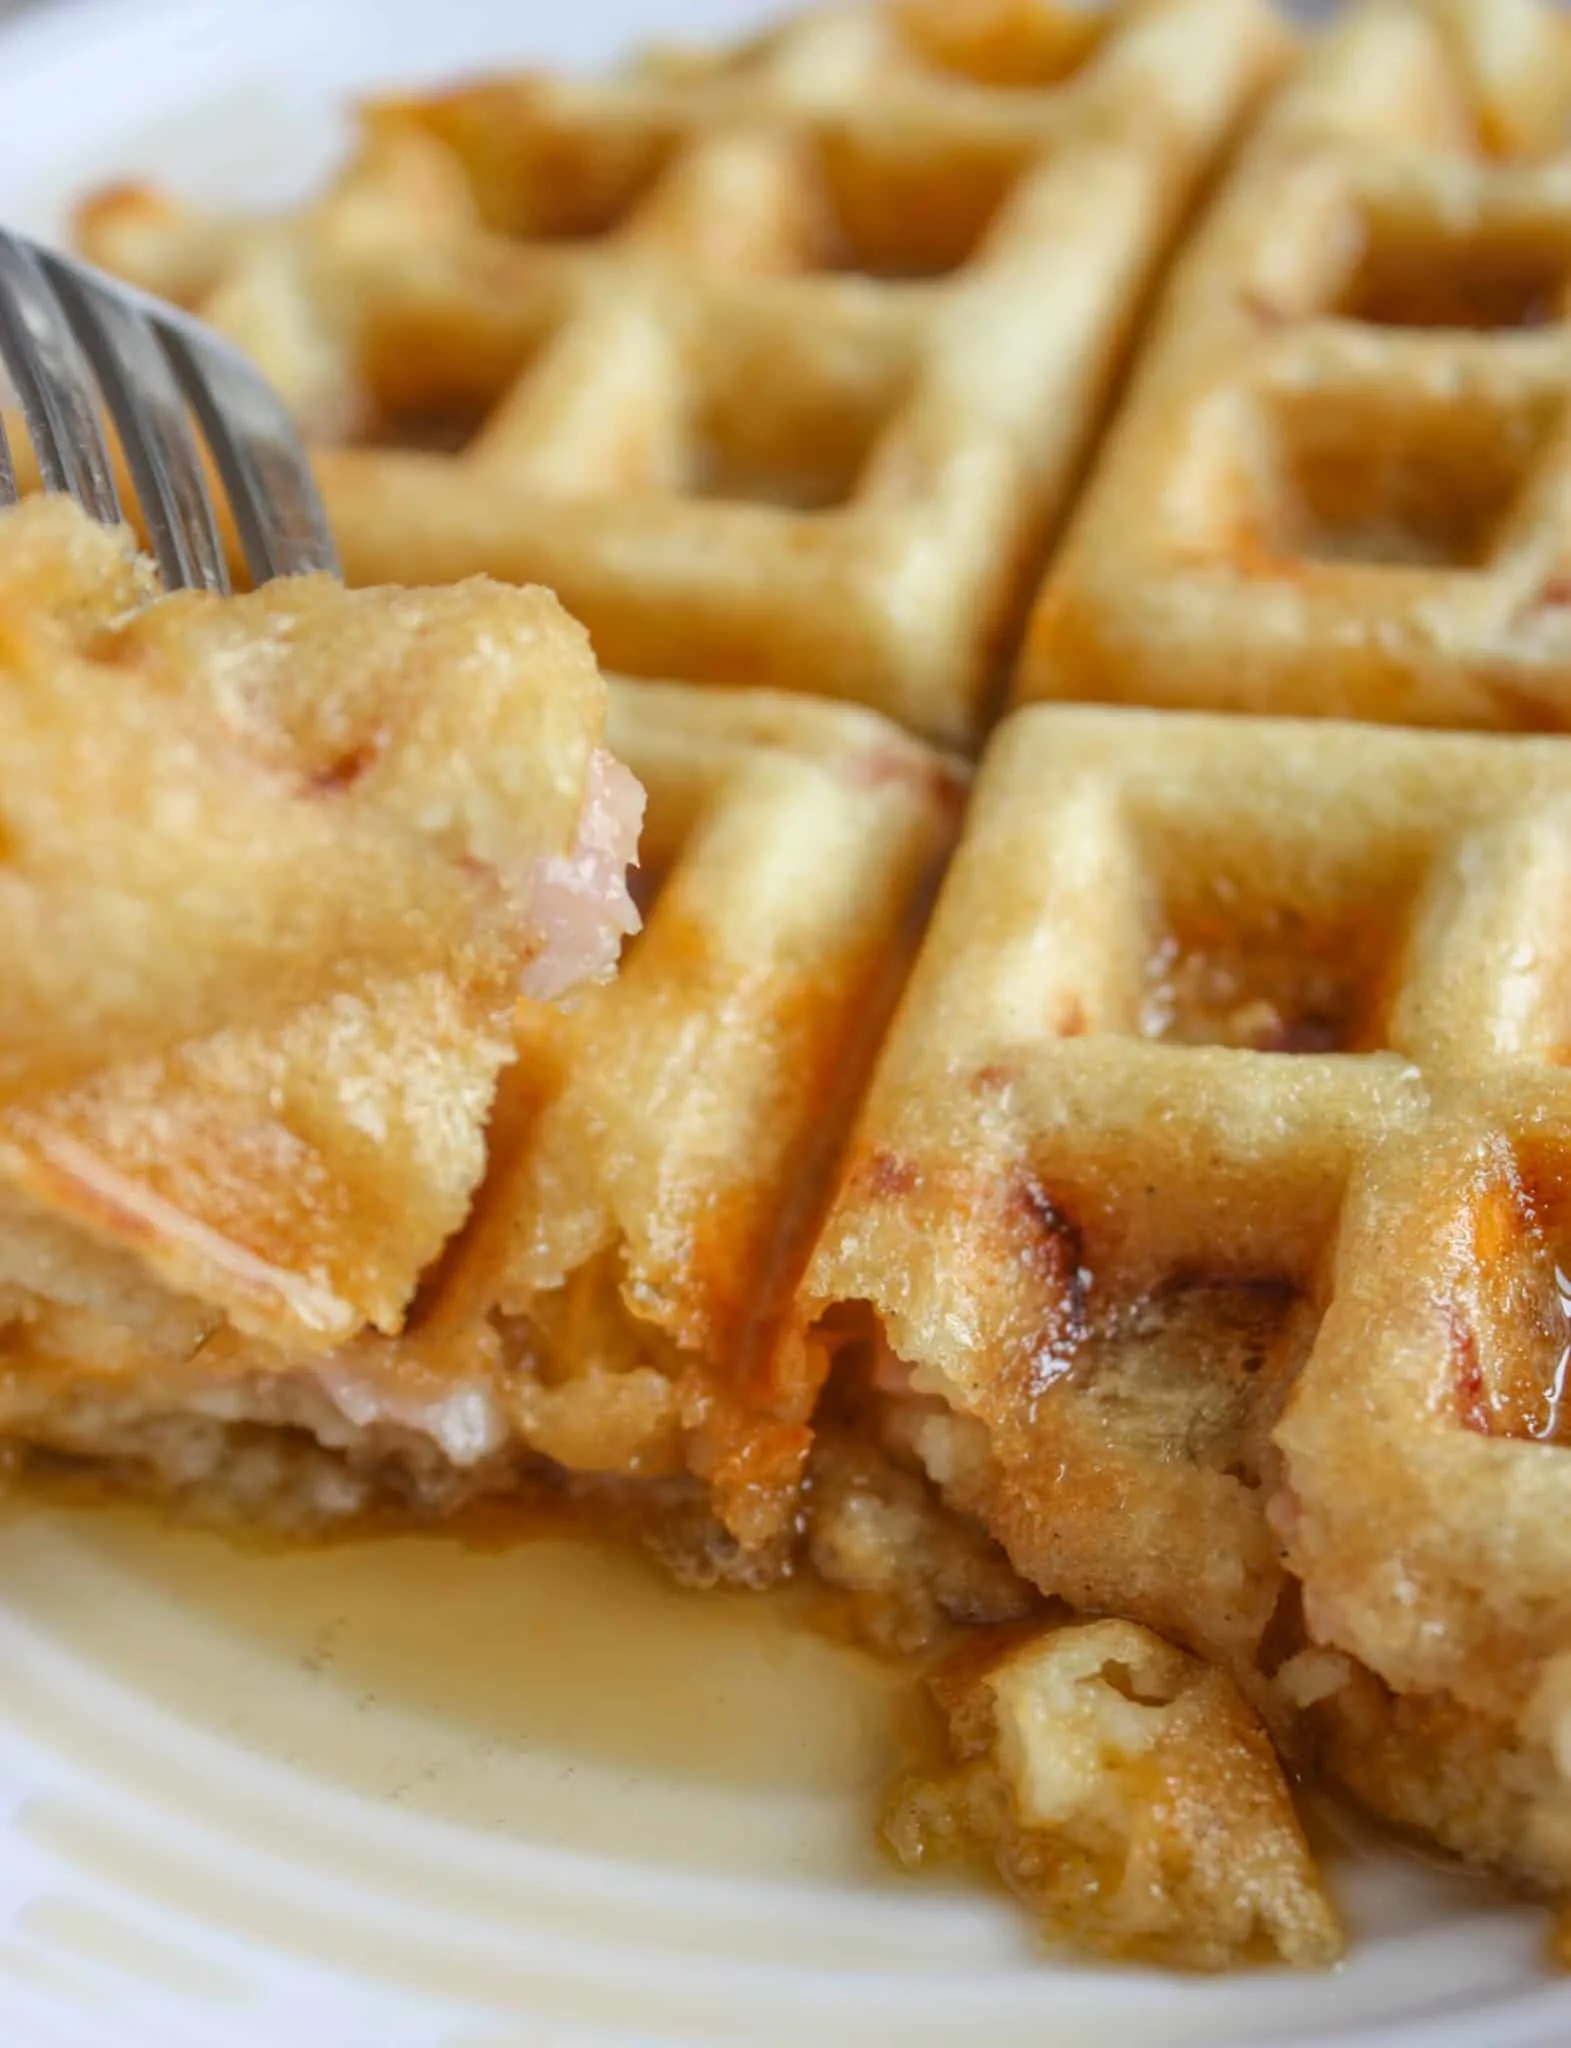 Waffles of any kind are a nice breakfast or brunch treat for young and old alike.  These gluten free Ham and Cheese Waffles provide a nice contrast of flavours with old cheddar cheese paired with pure maple syrup.